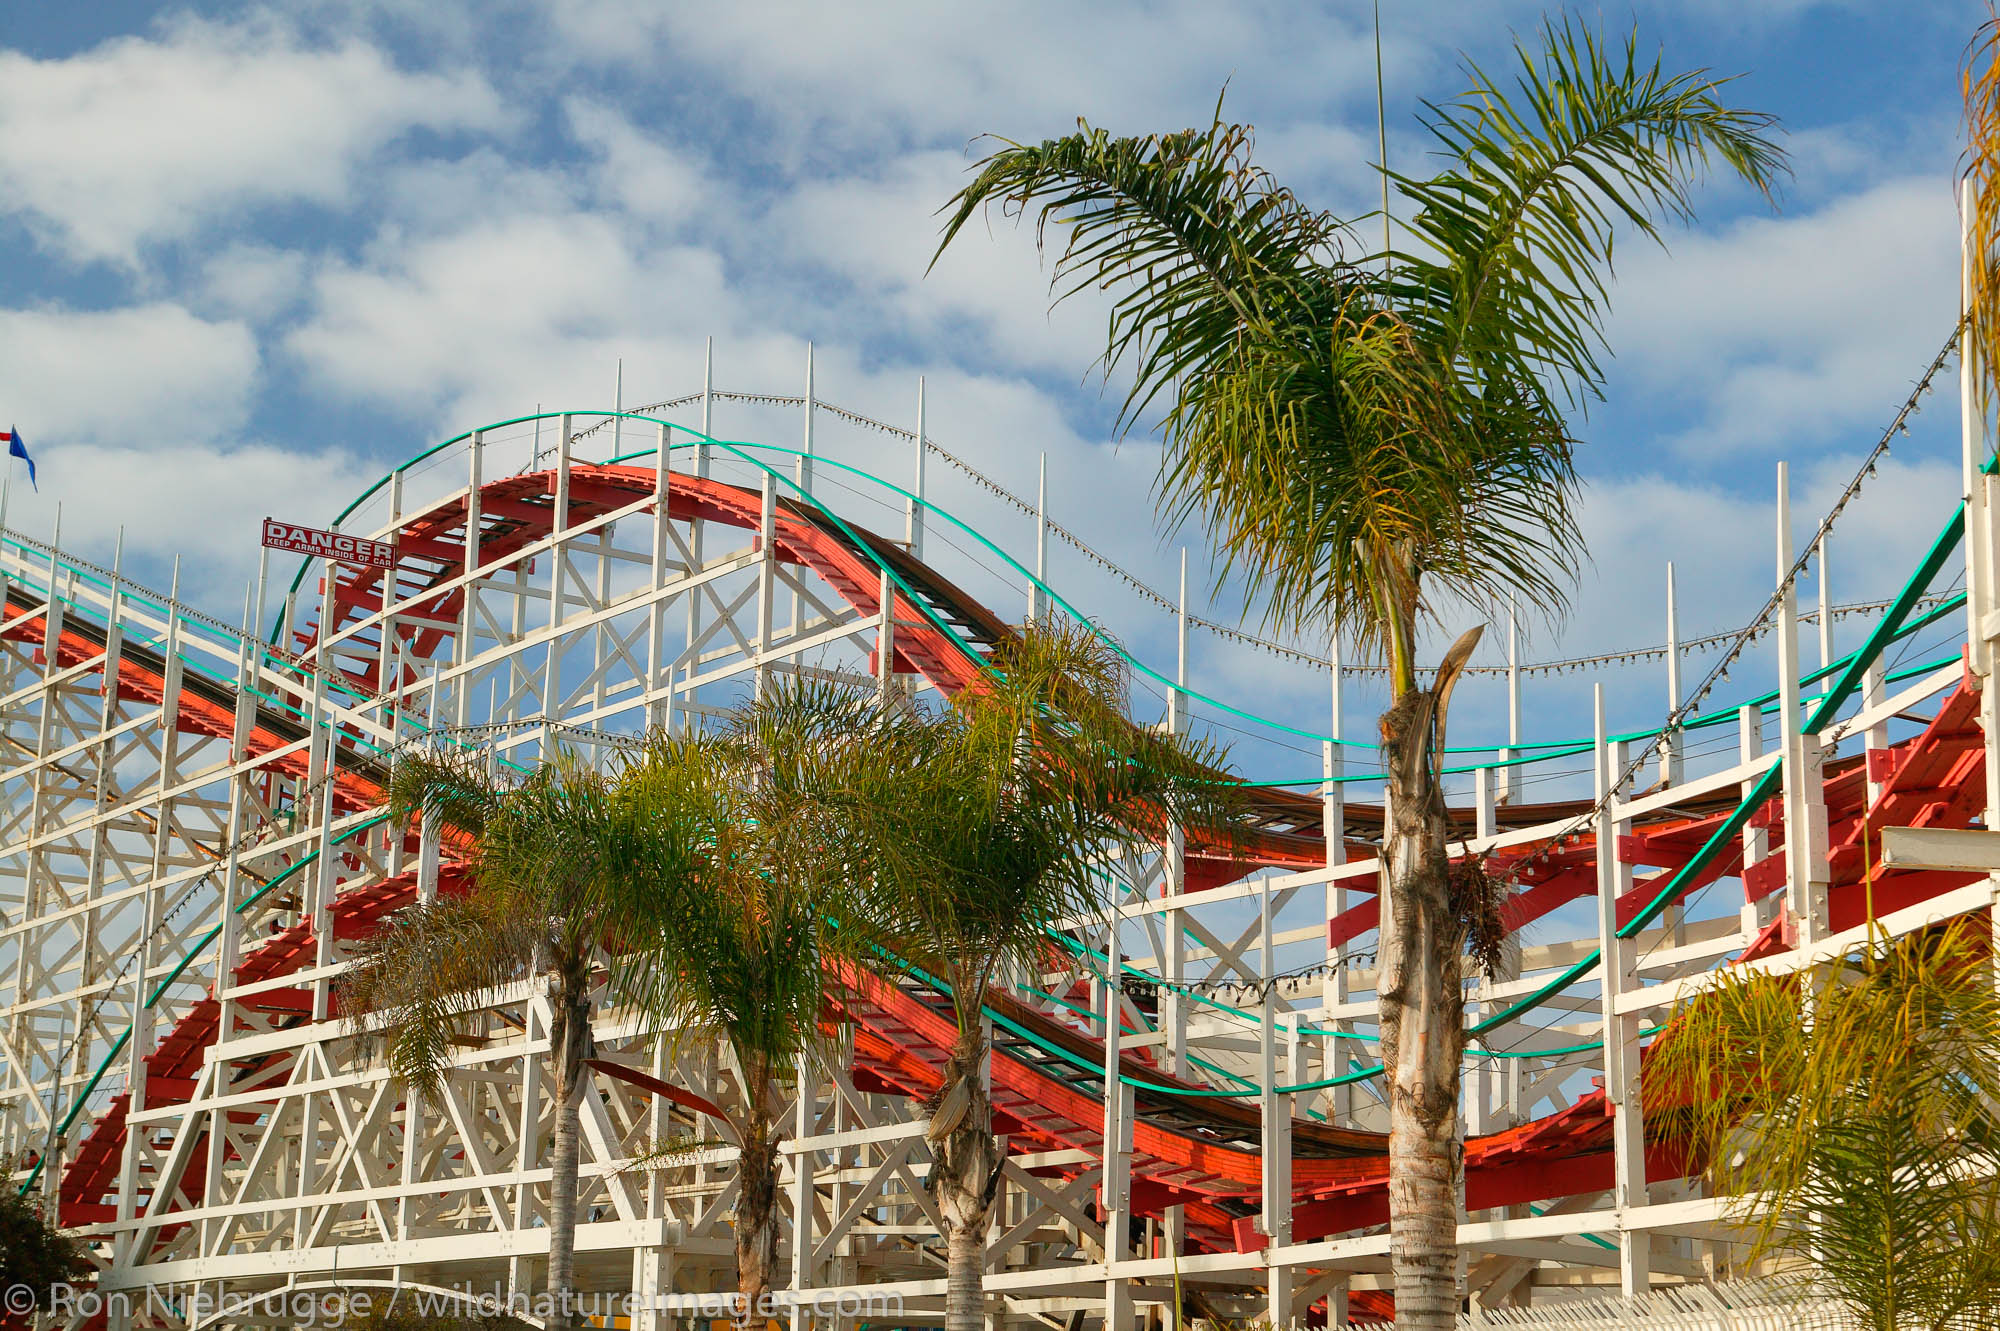 Wooden rollercoaster at Belmont Park at Mission Beach, San Diego, California.